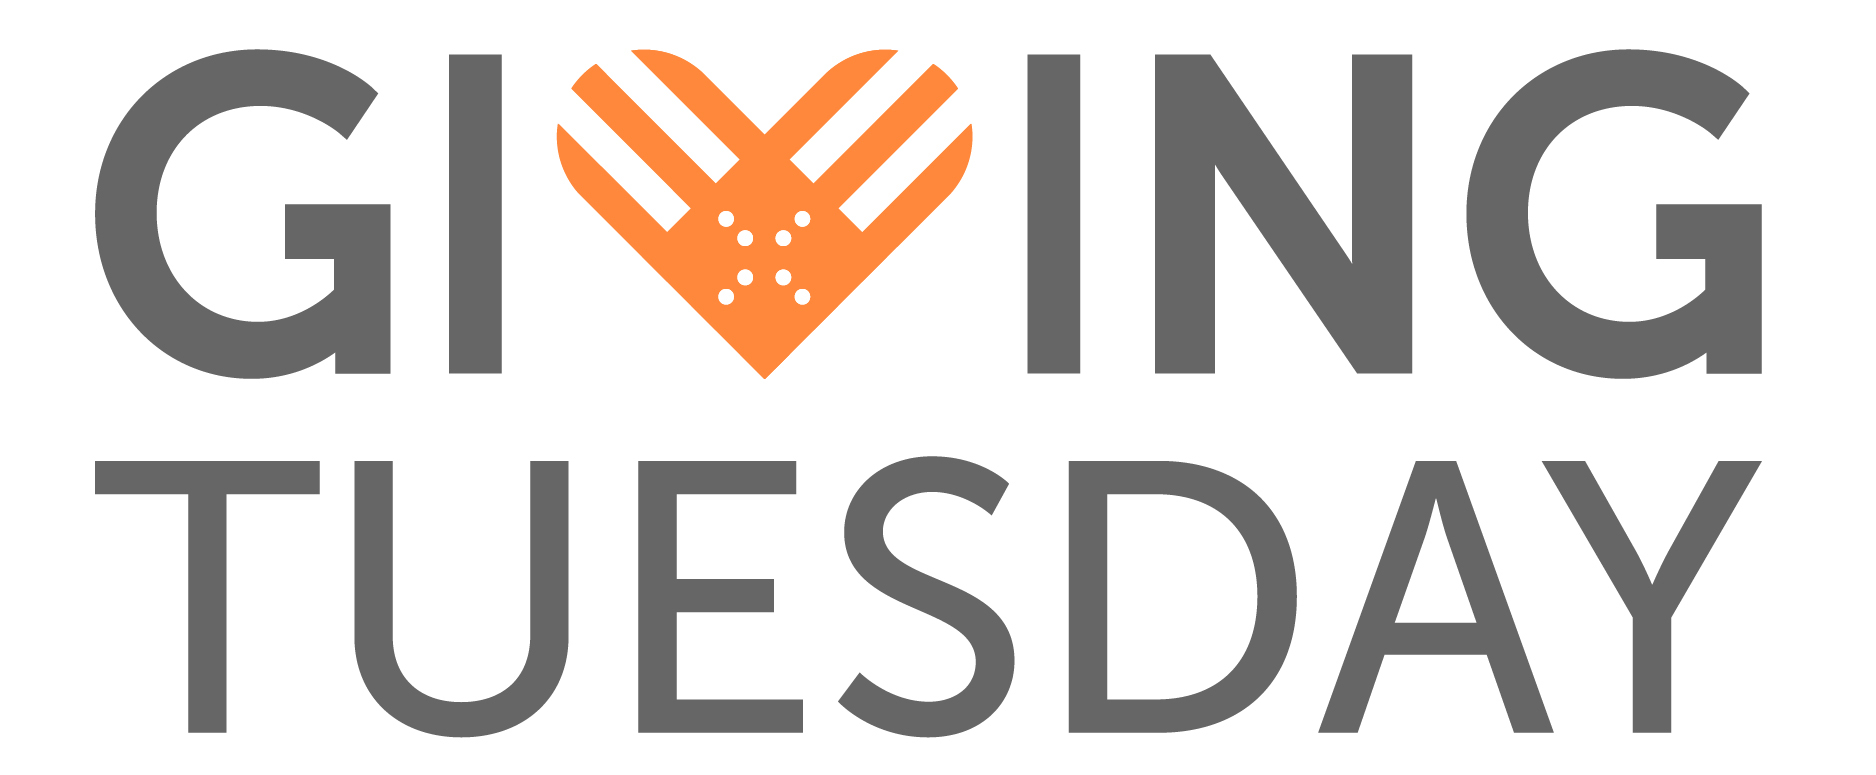 2022 X by 2 Giving Tuesday Virtual Food Drive